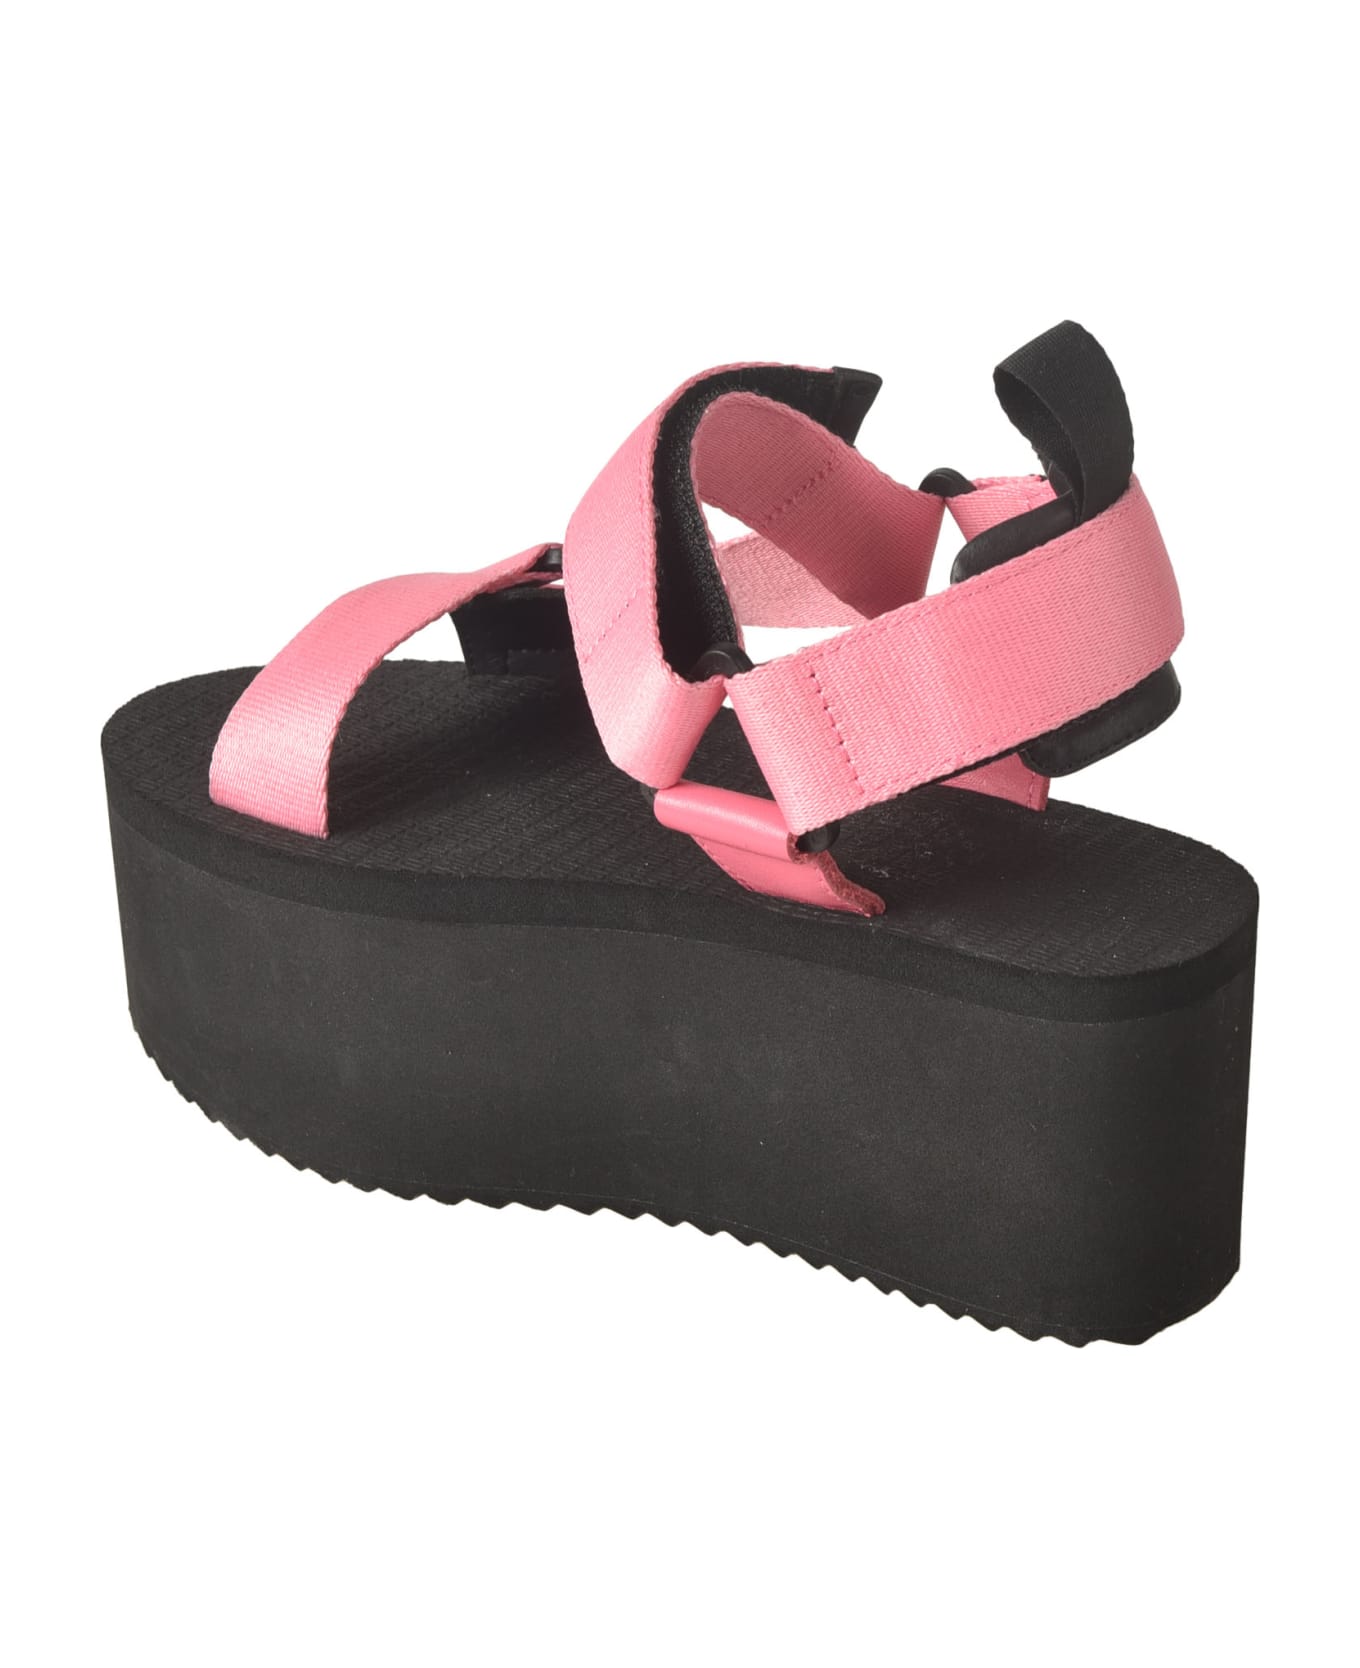 Moschino Strappy Wedge Sandals - Pink